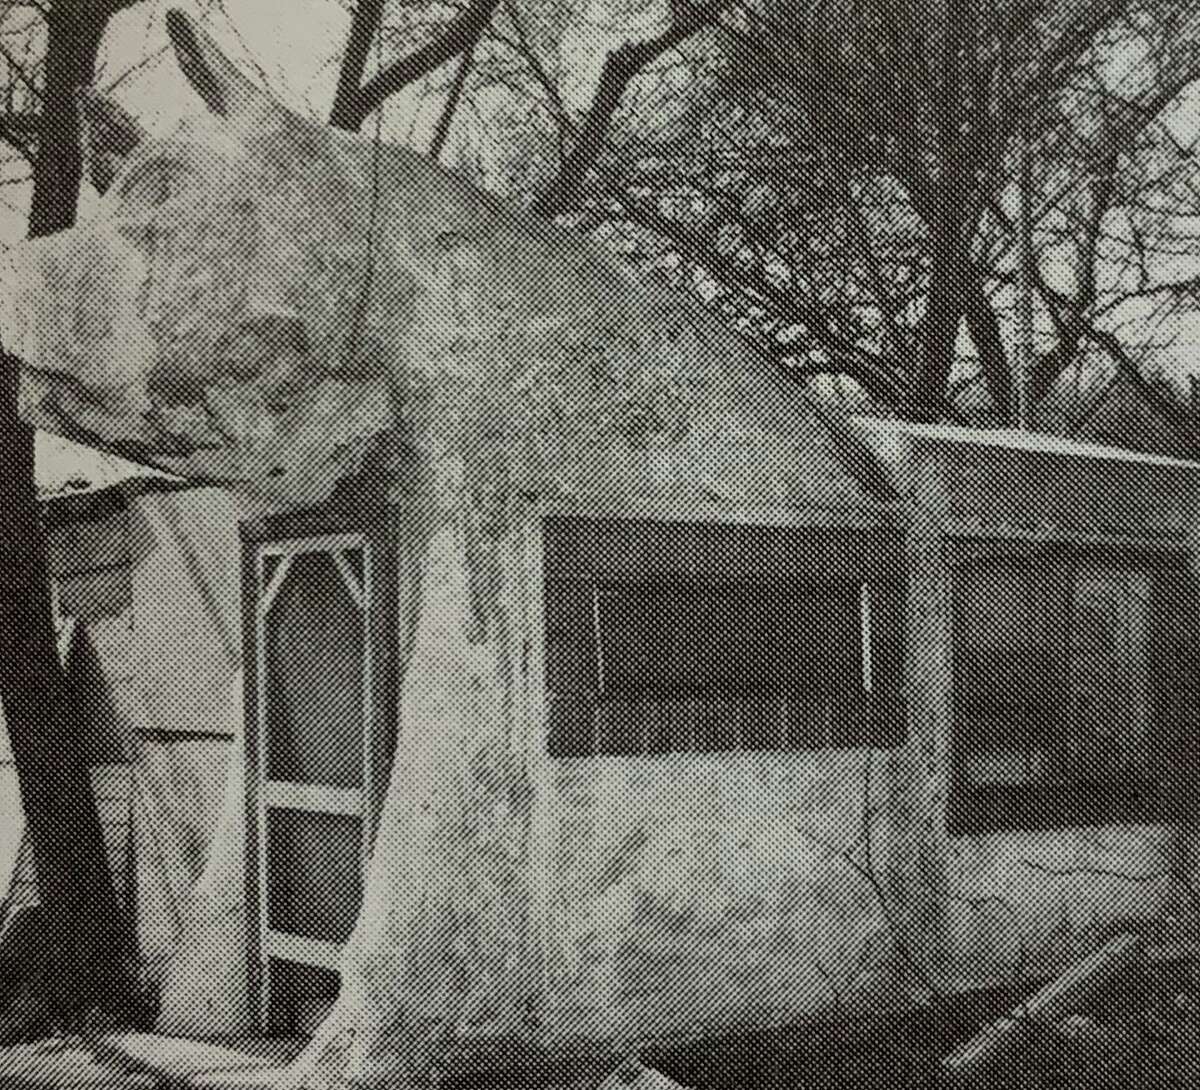 A 1940s photo of the Big Pig structure in San Antonio, best known for its placement at the old Pig Stand diner on South Presa Street. The image appears in “Built in the USA: American Buildings from Airports to Zoos,” published by the National Trust for Historic Preservation.